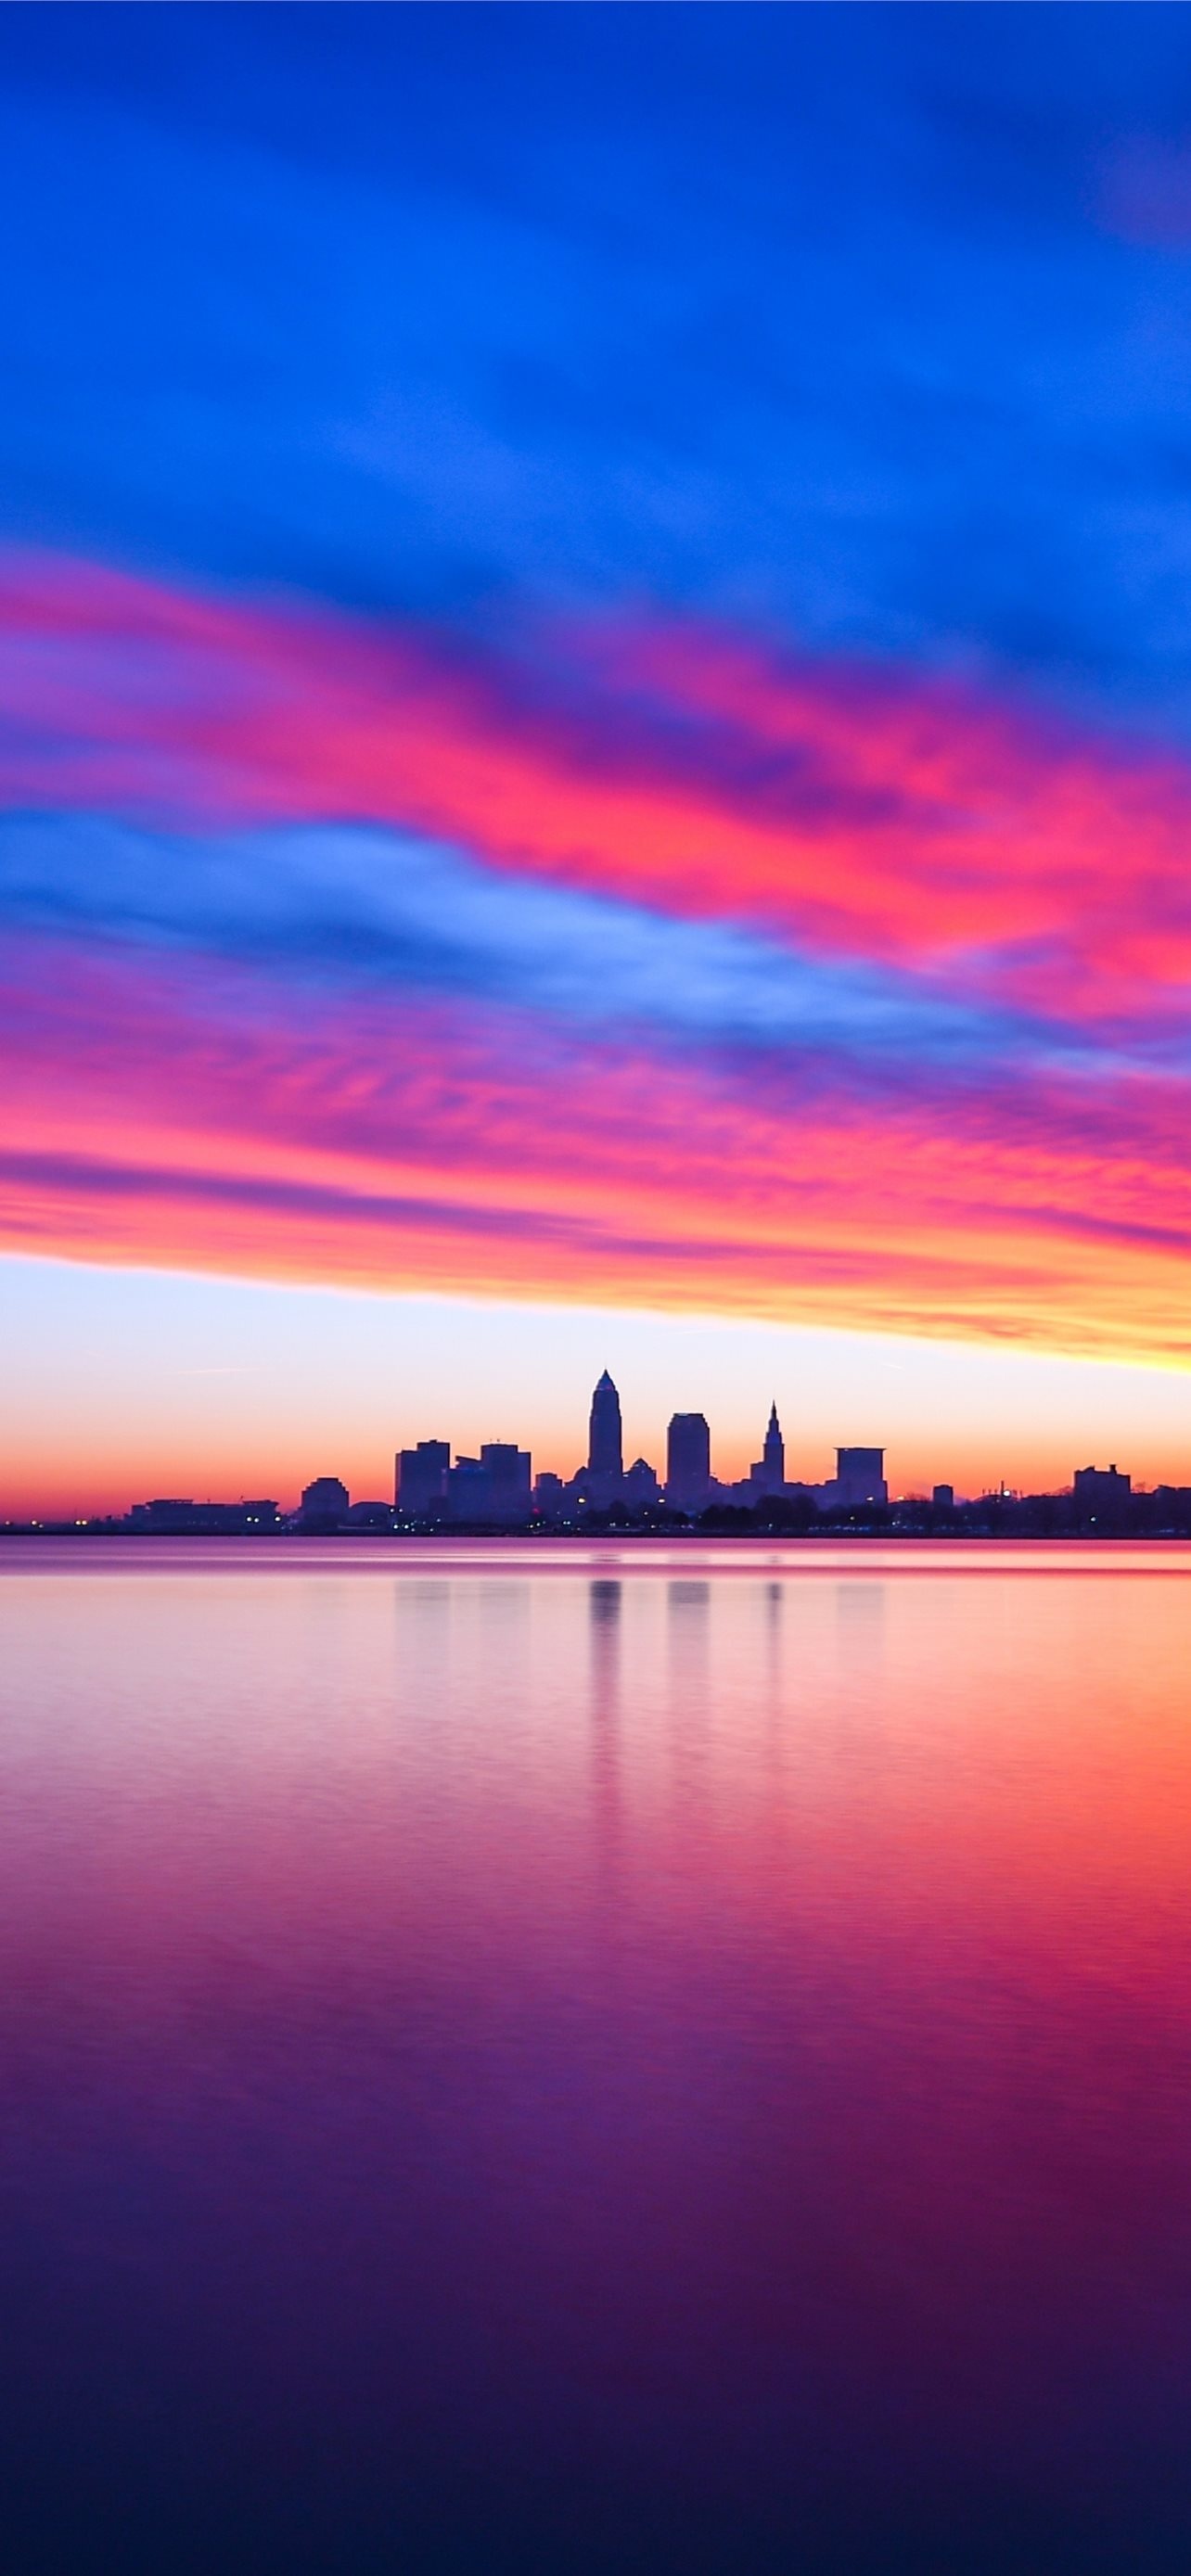 Cleveland, Latest iPhone wallpapers, HD backgrounds, Phone customization, 1290x2780 HD Handy